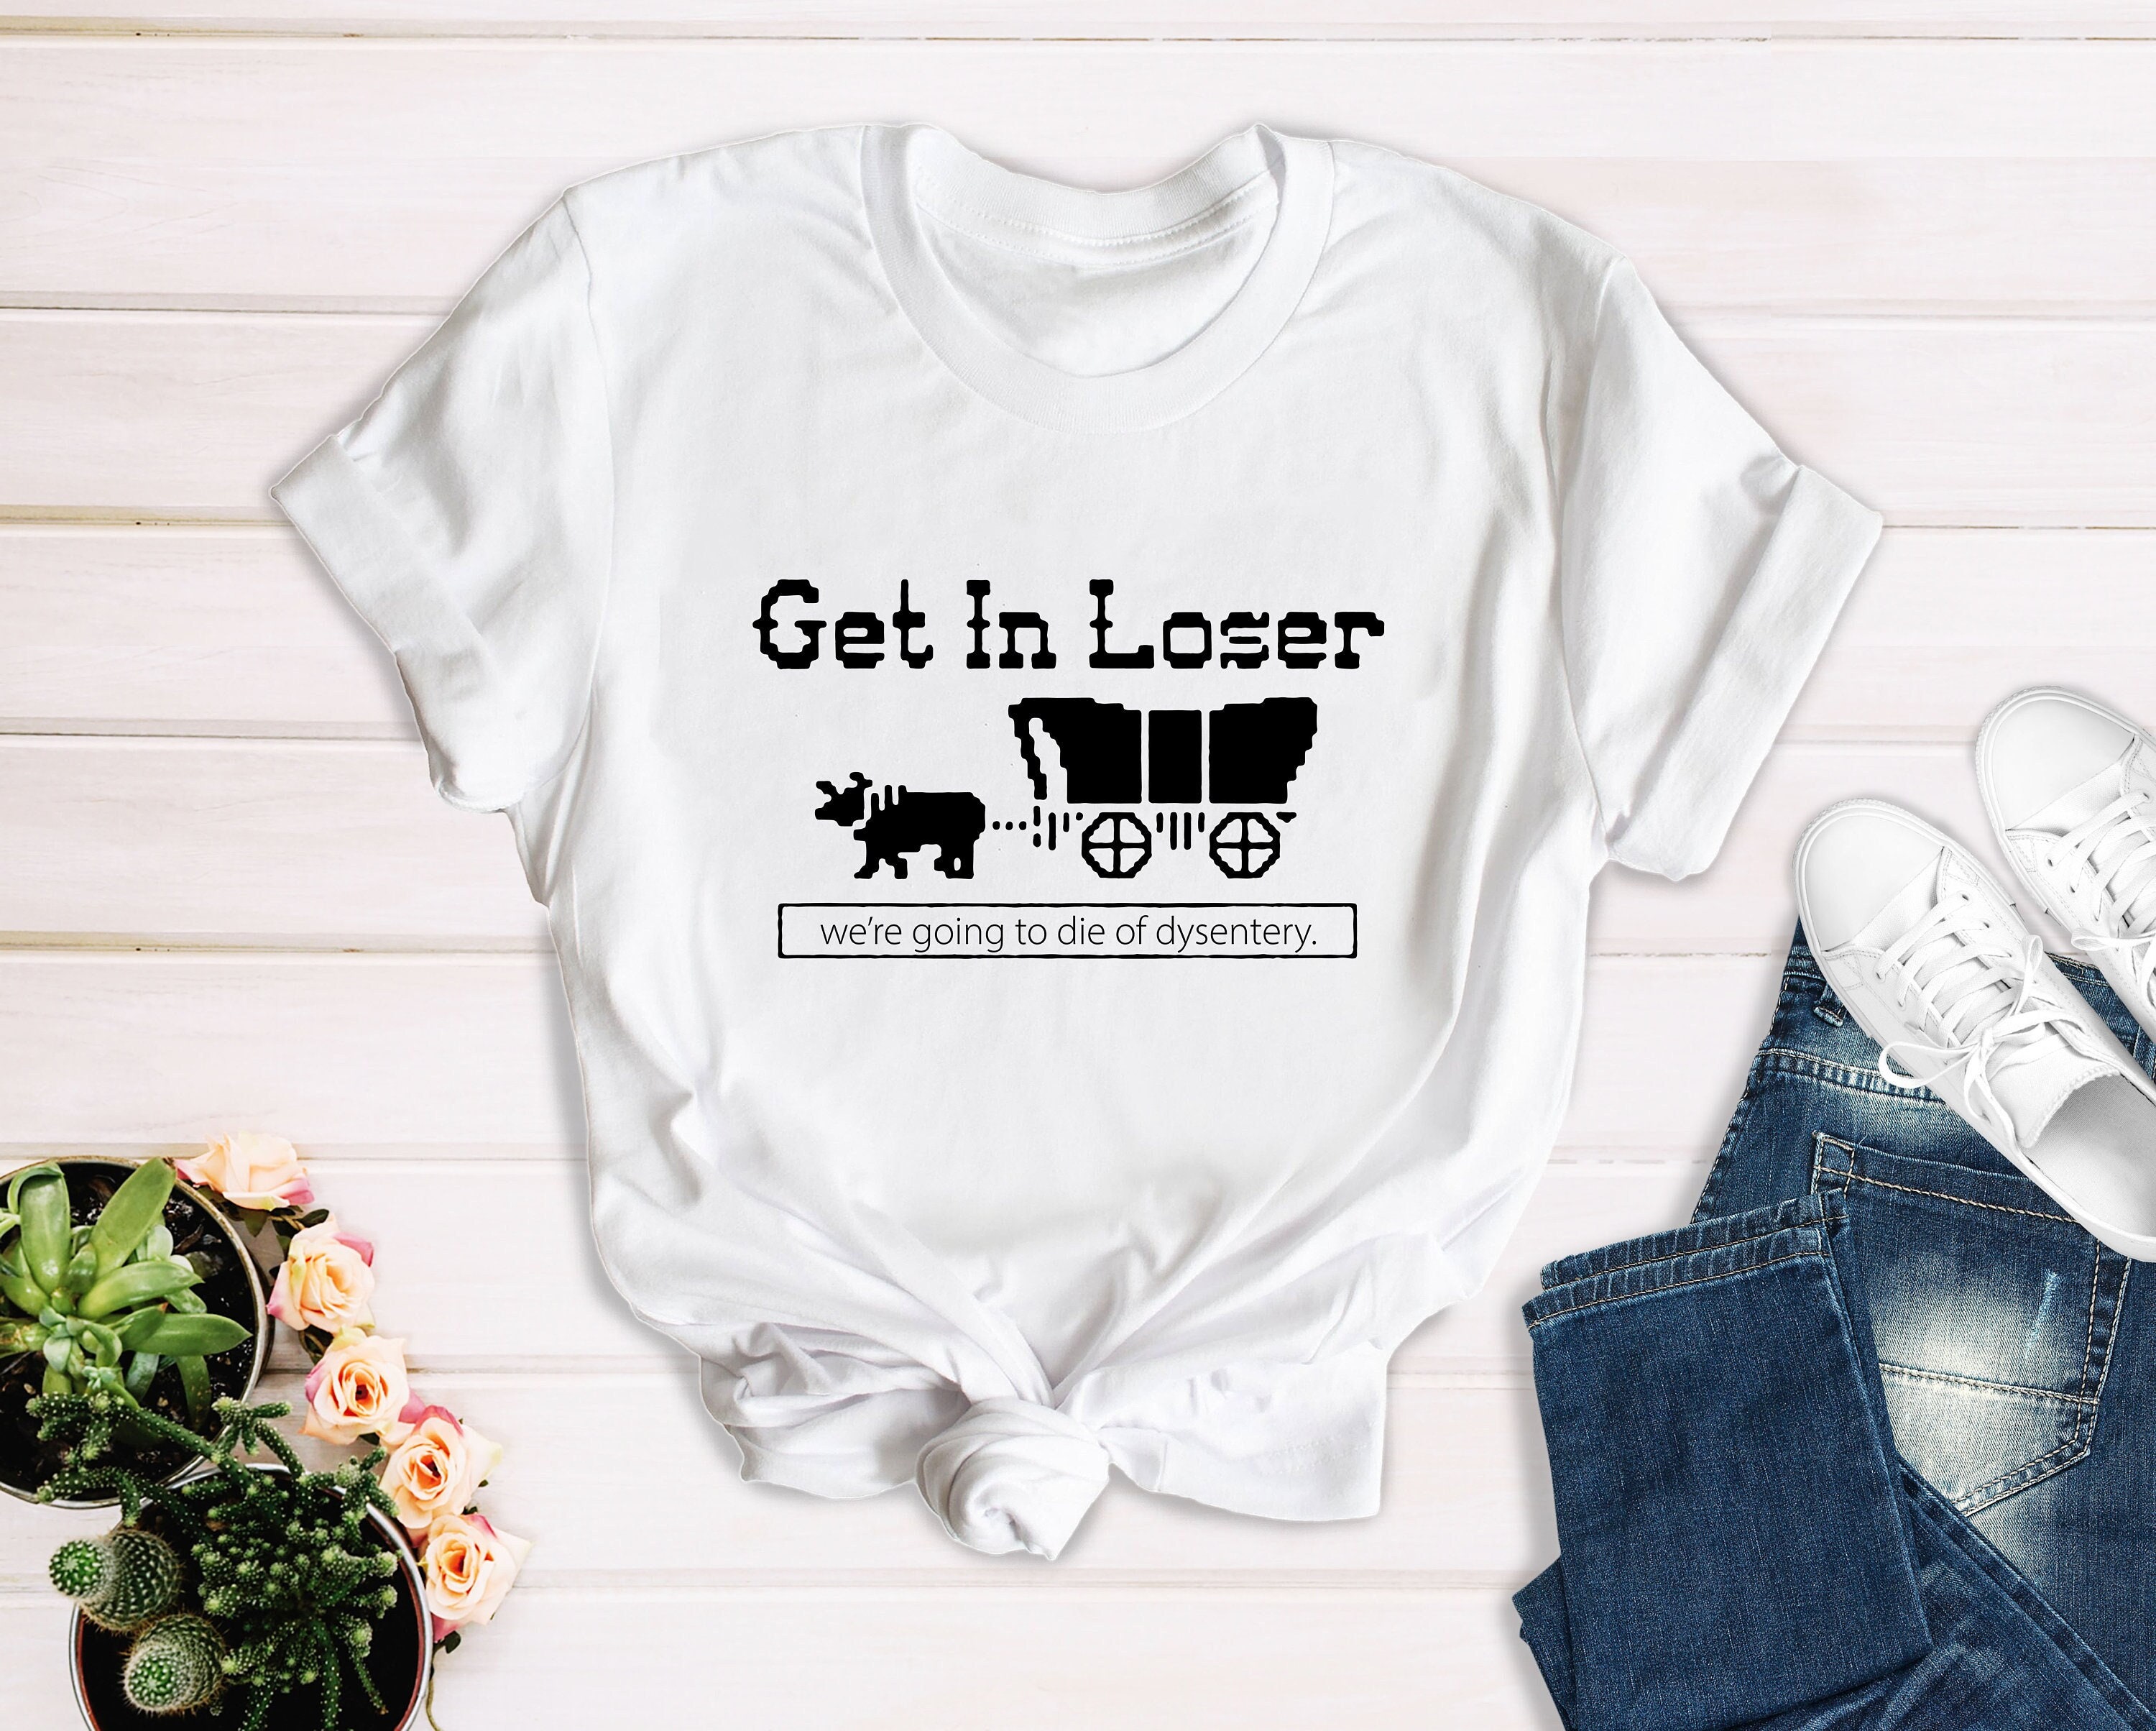 Get In Loser We're Going To Die Of Dysentery ,Gamer Shirt, Movie Shirt, Funny Shirt,Horror Movie Shirt, Oregon Trail Gift